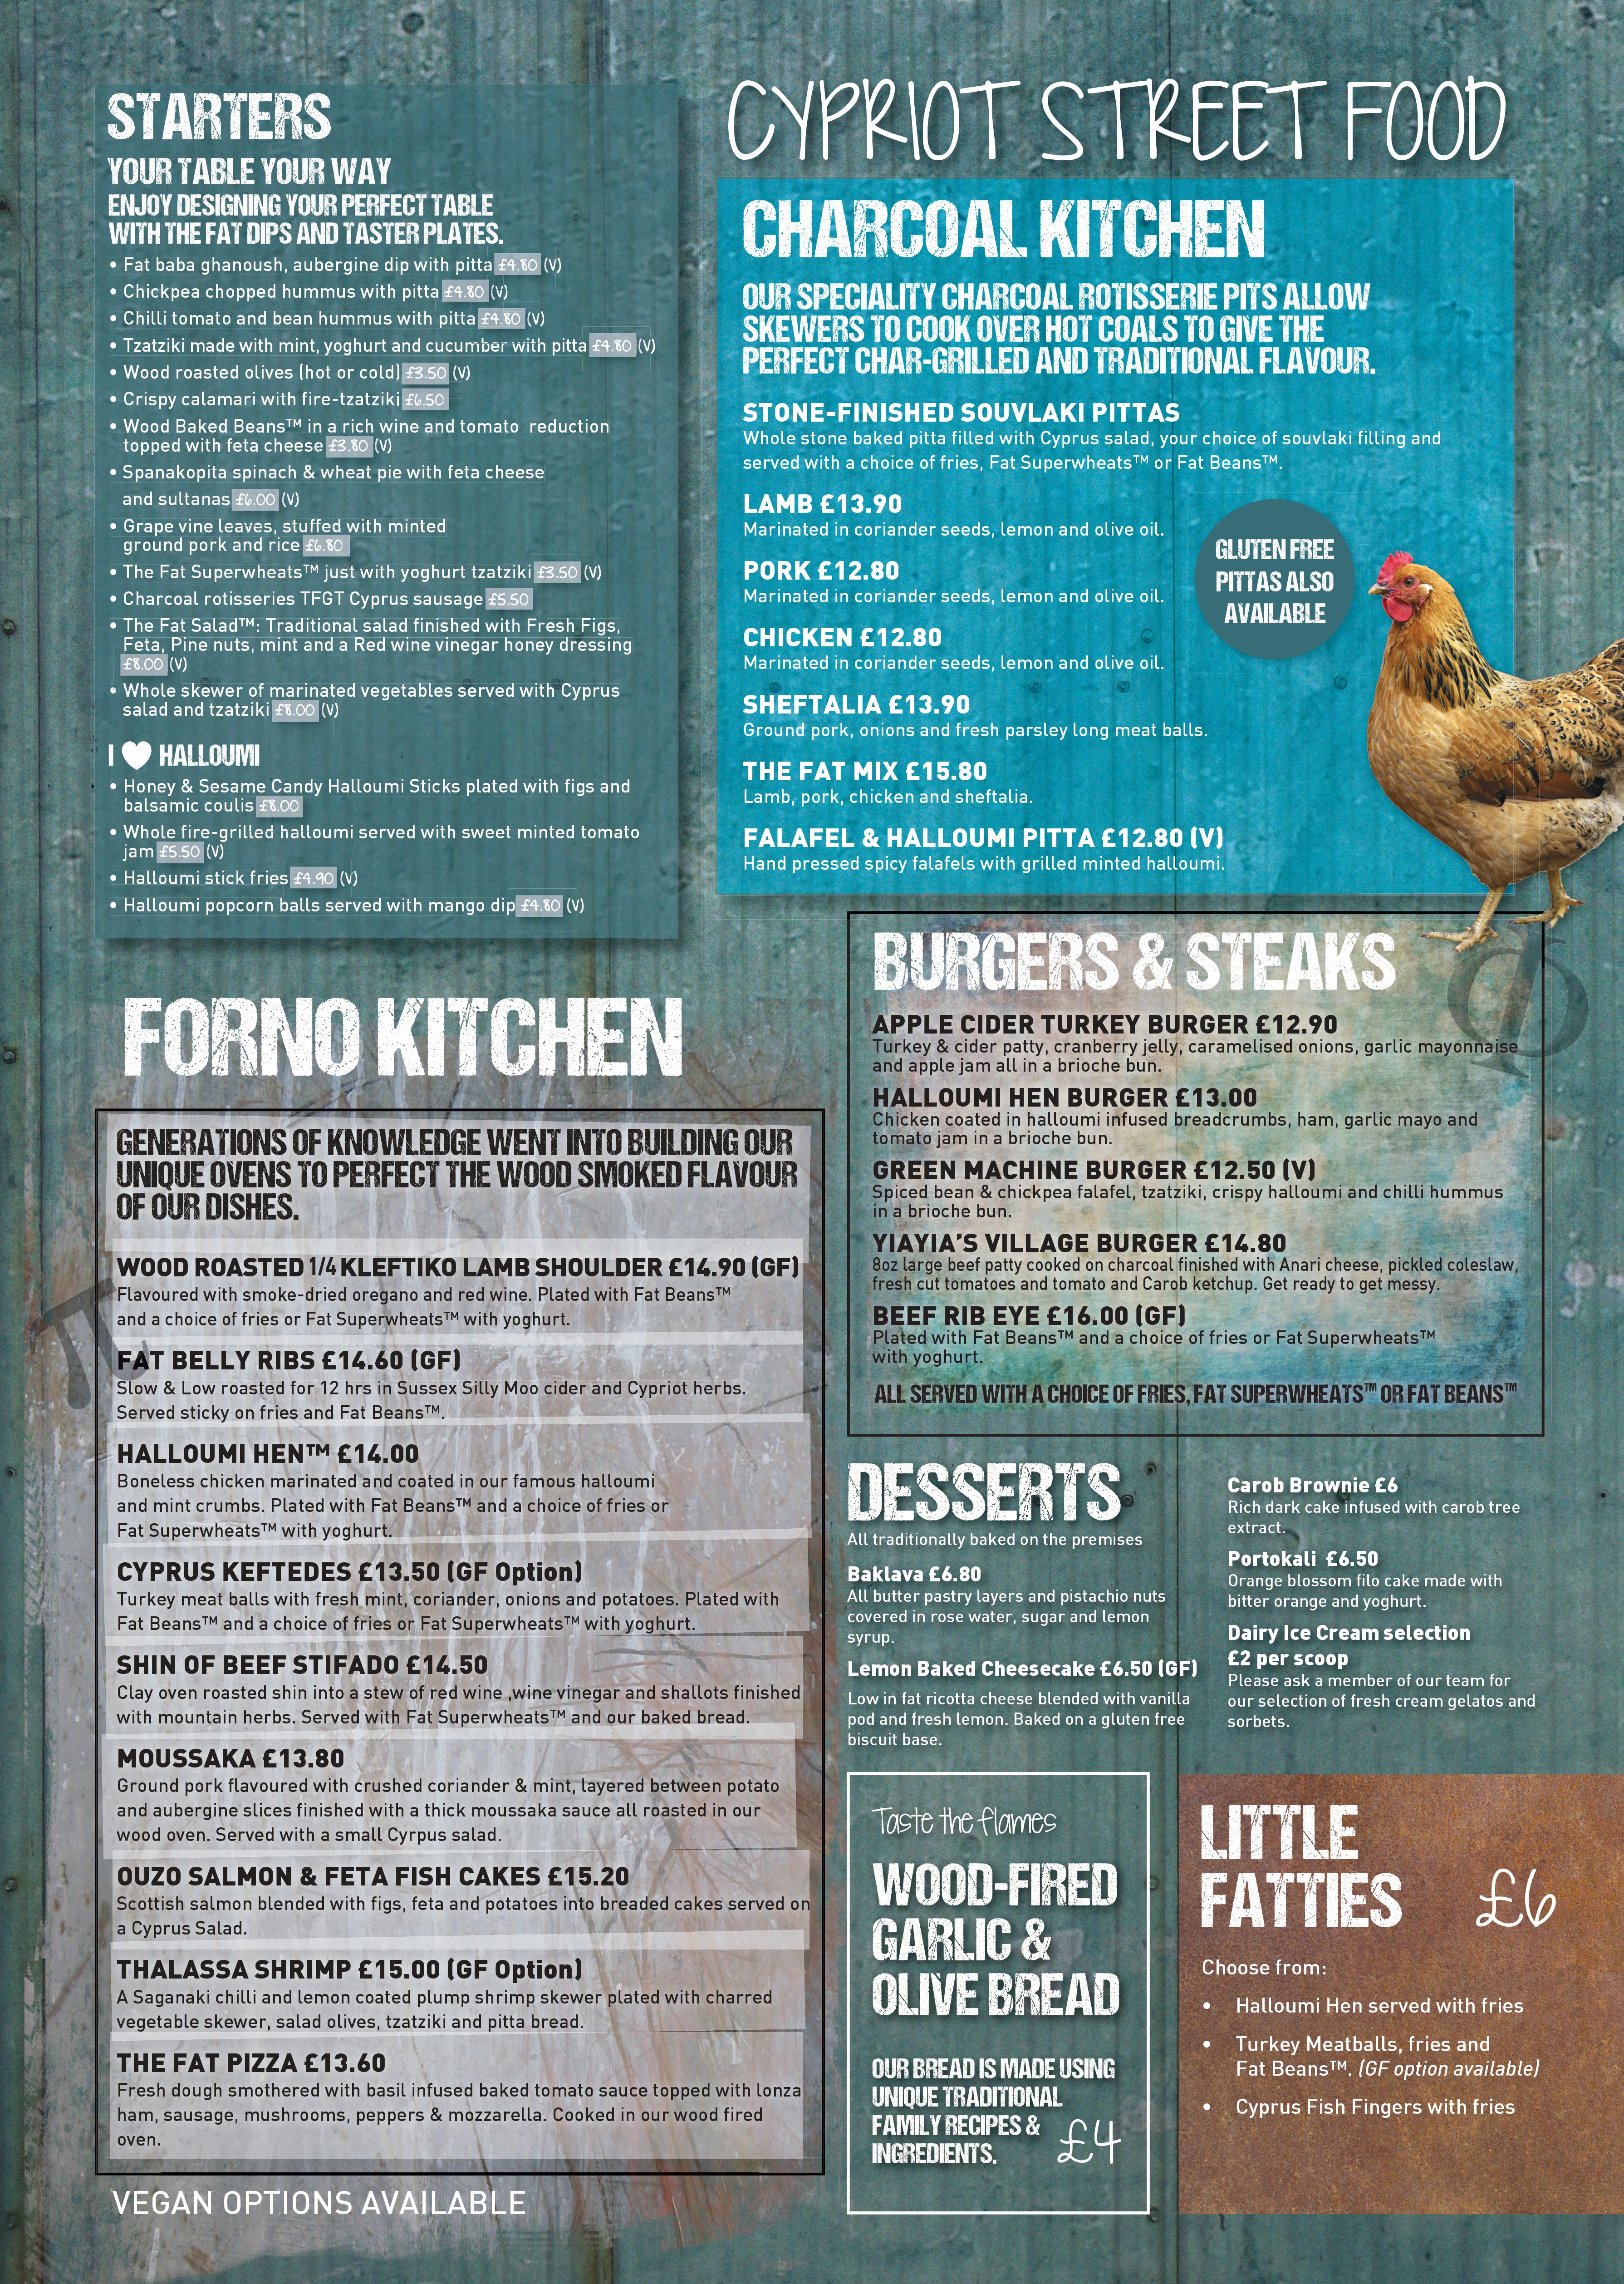 DOWNLOAD OUR NEW MENU HERE...